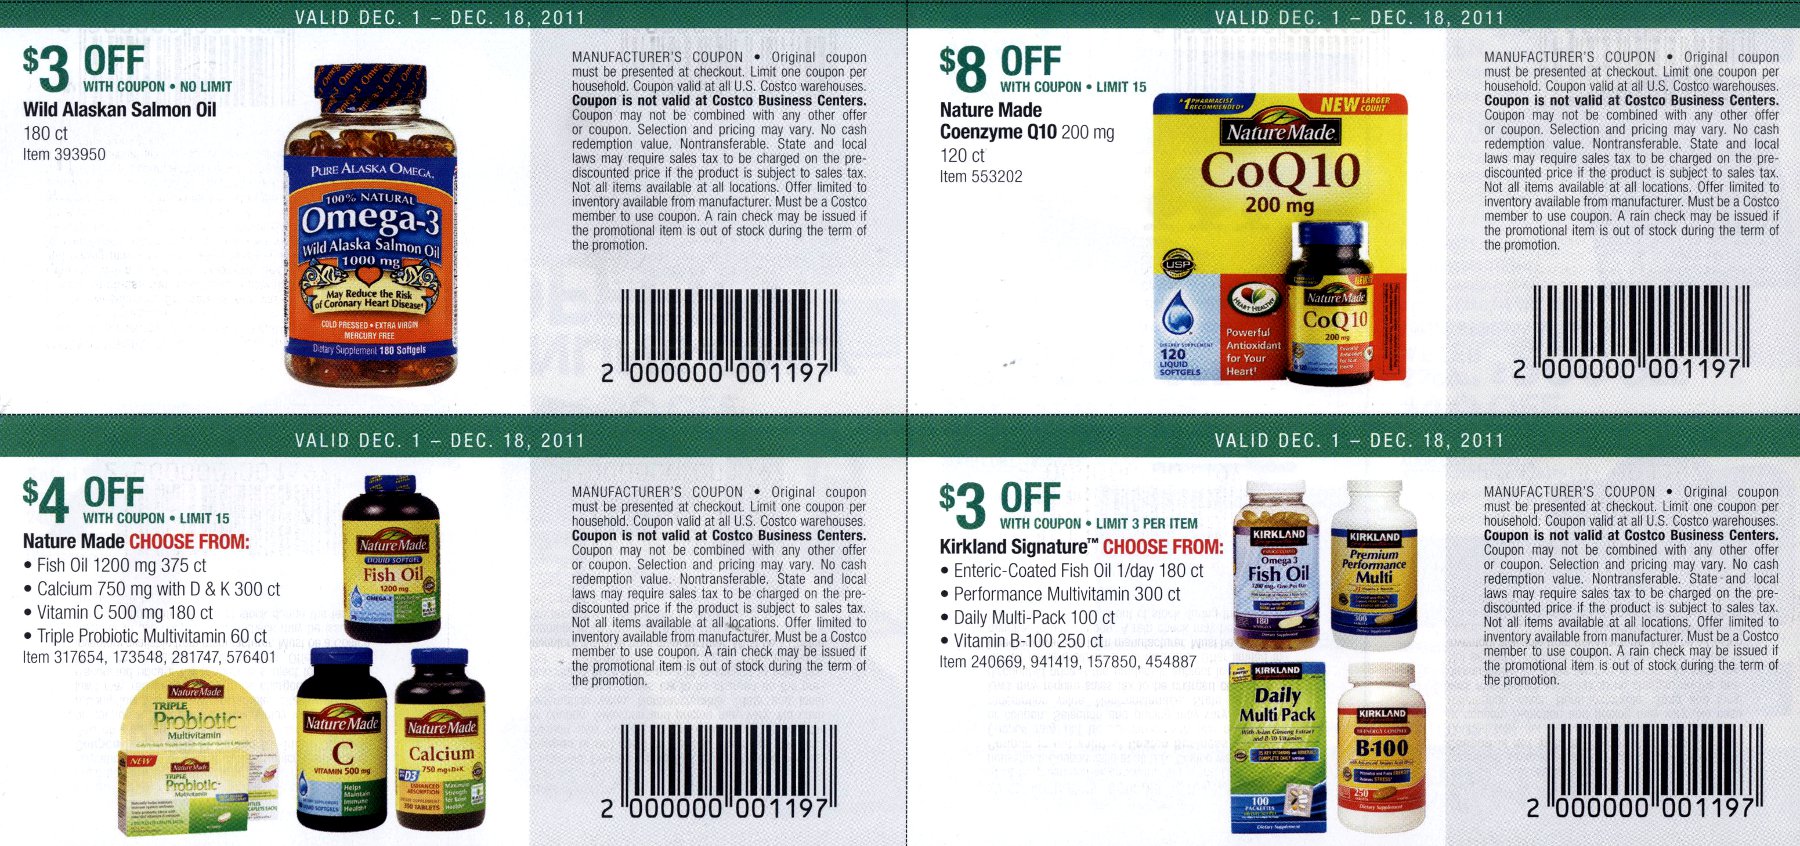 Coupon book full size page -> 9 <-